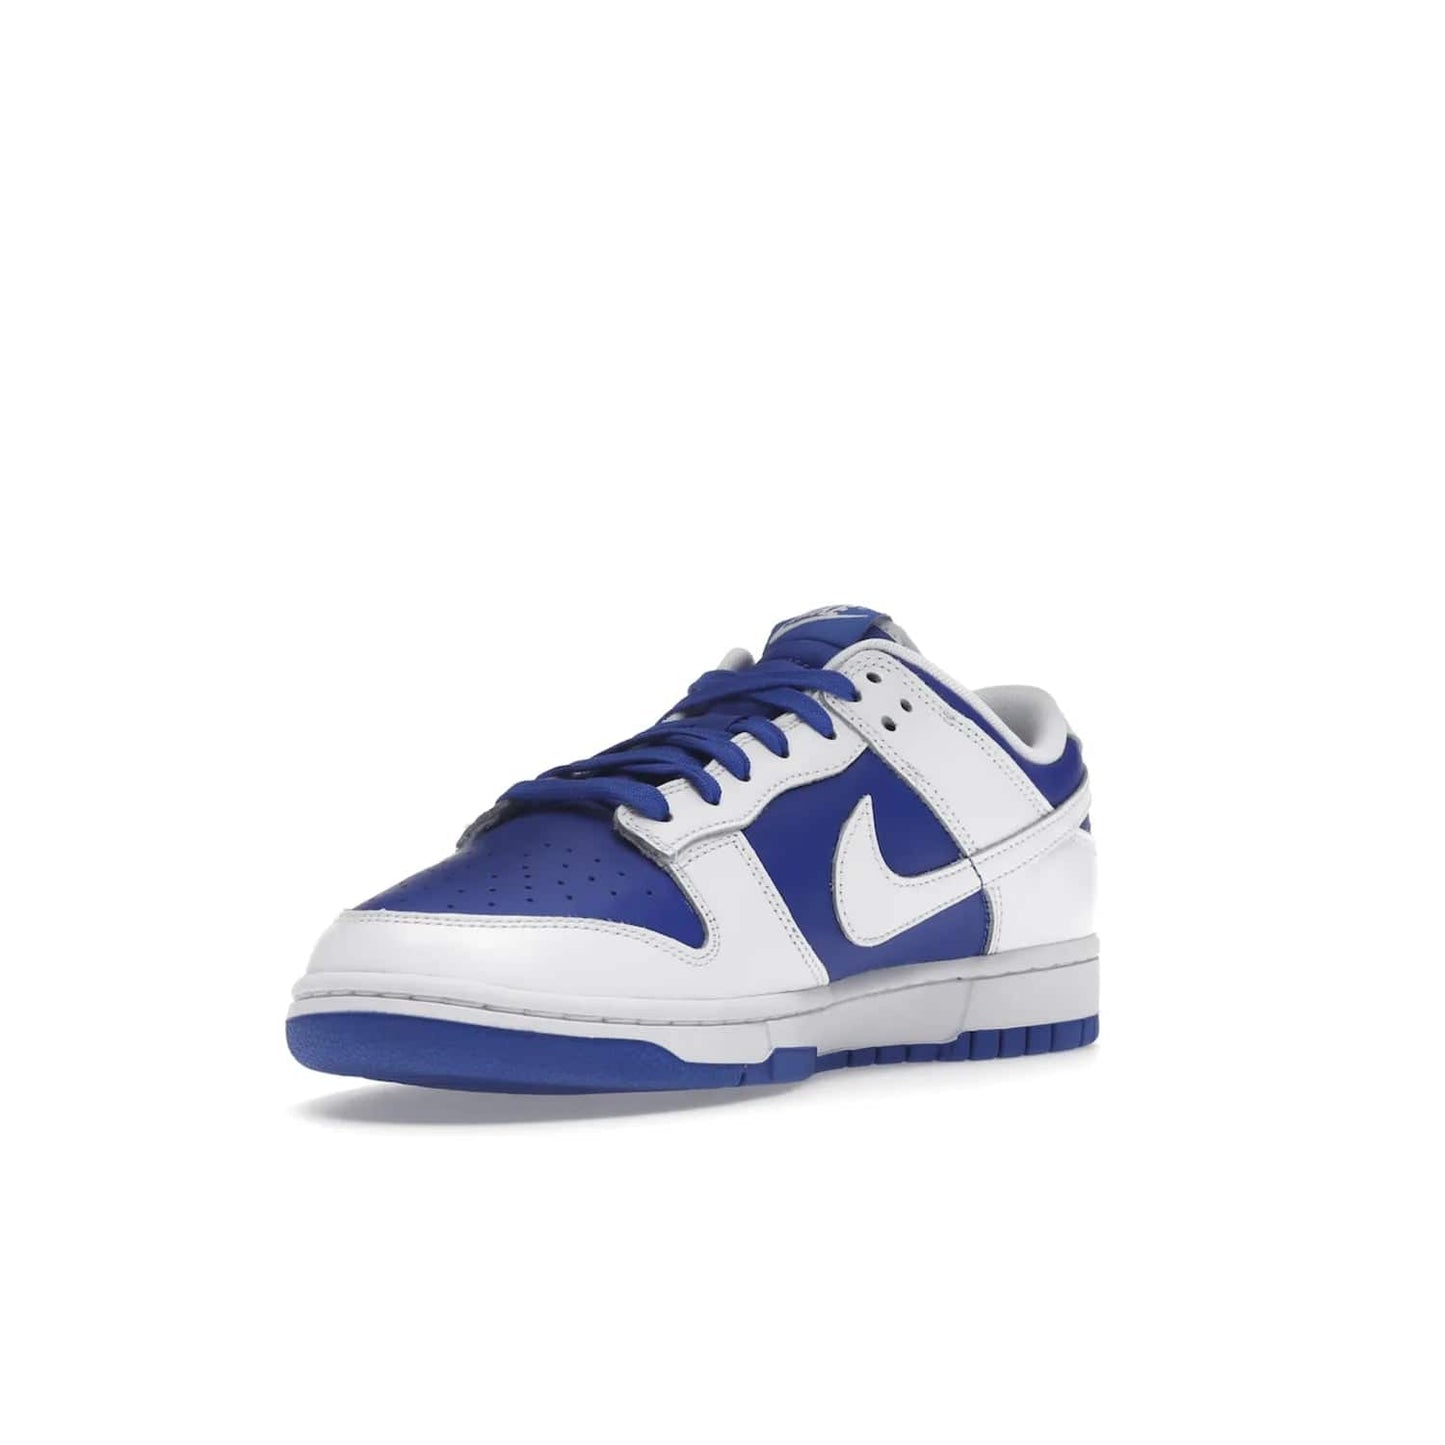 Nike Dunk Low Racer Blue White - Image 14 - Only at www.BallersClubKickz.com - Sleek Racer Blue leather upper and white leather overlays make up the Nike Dunk Low Racer Blue White. Woven tag and heel embroidery for a 1985 Dunk look with a matching EVA foam sole completes the classic colorway.